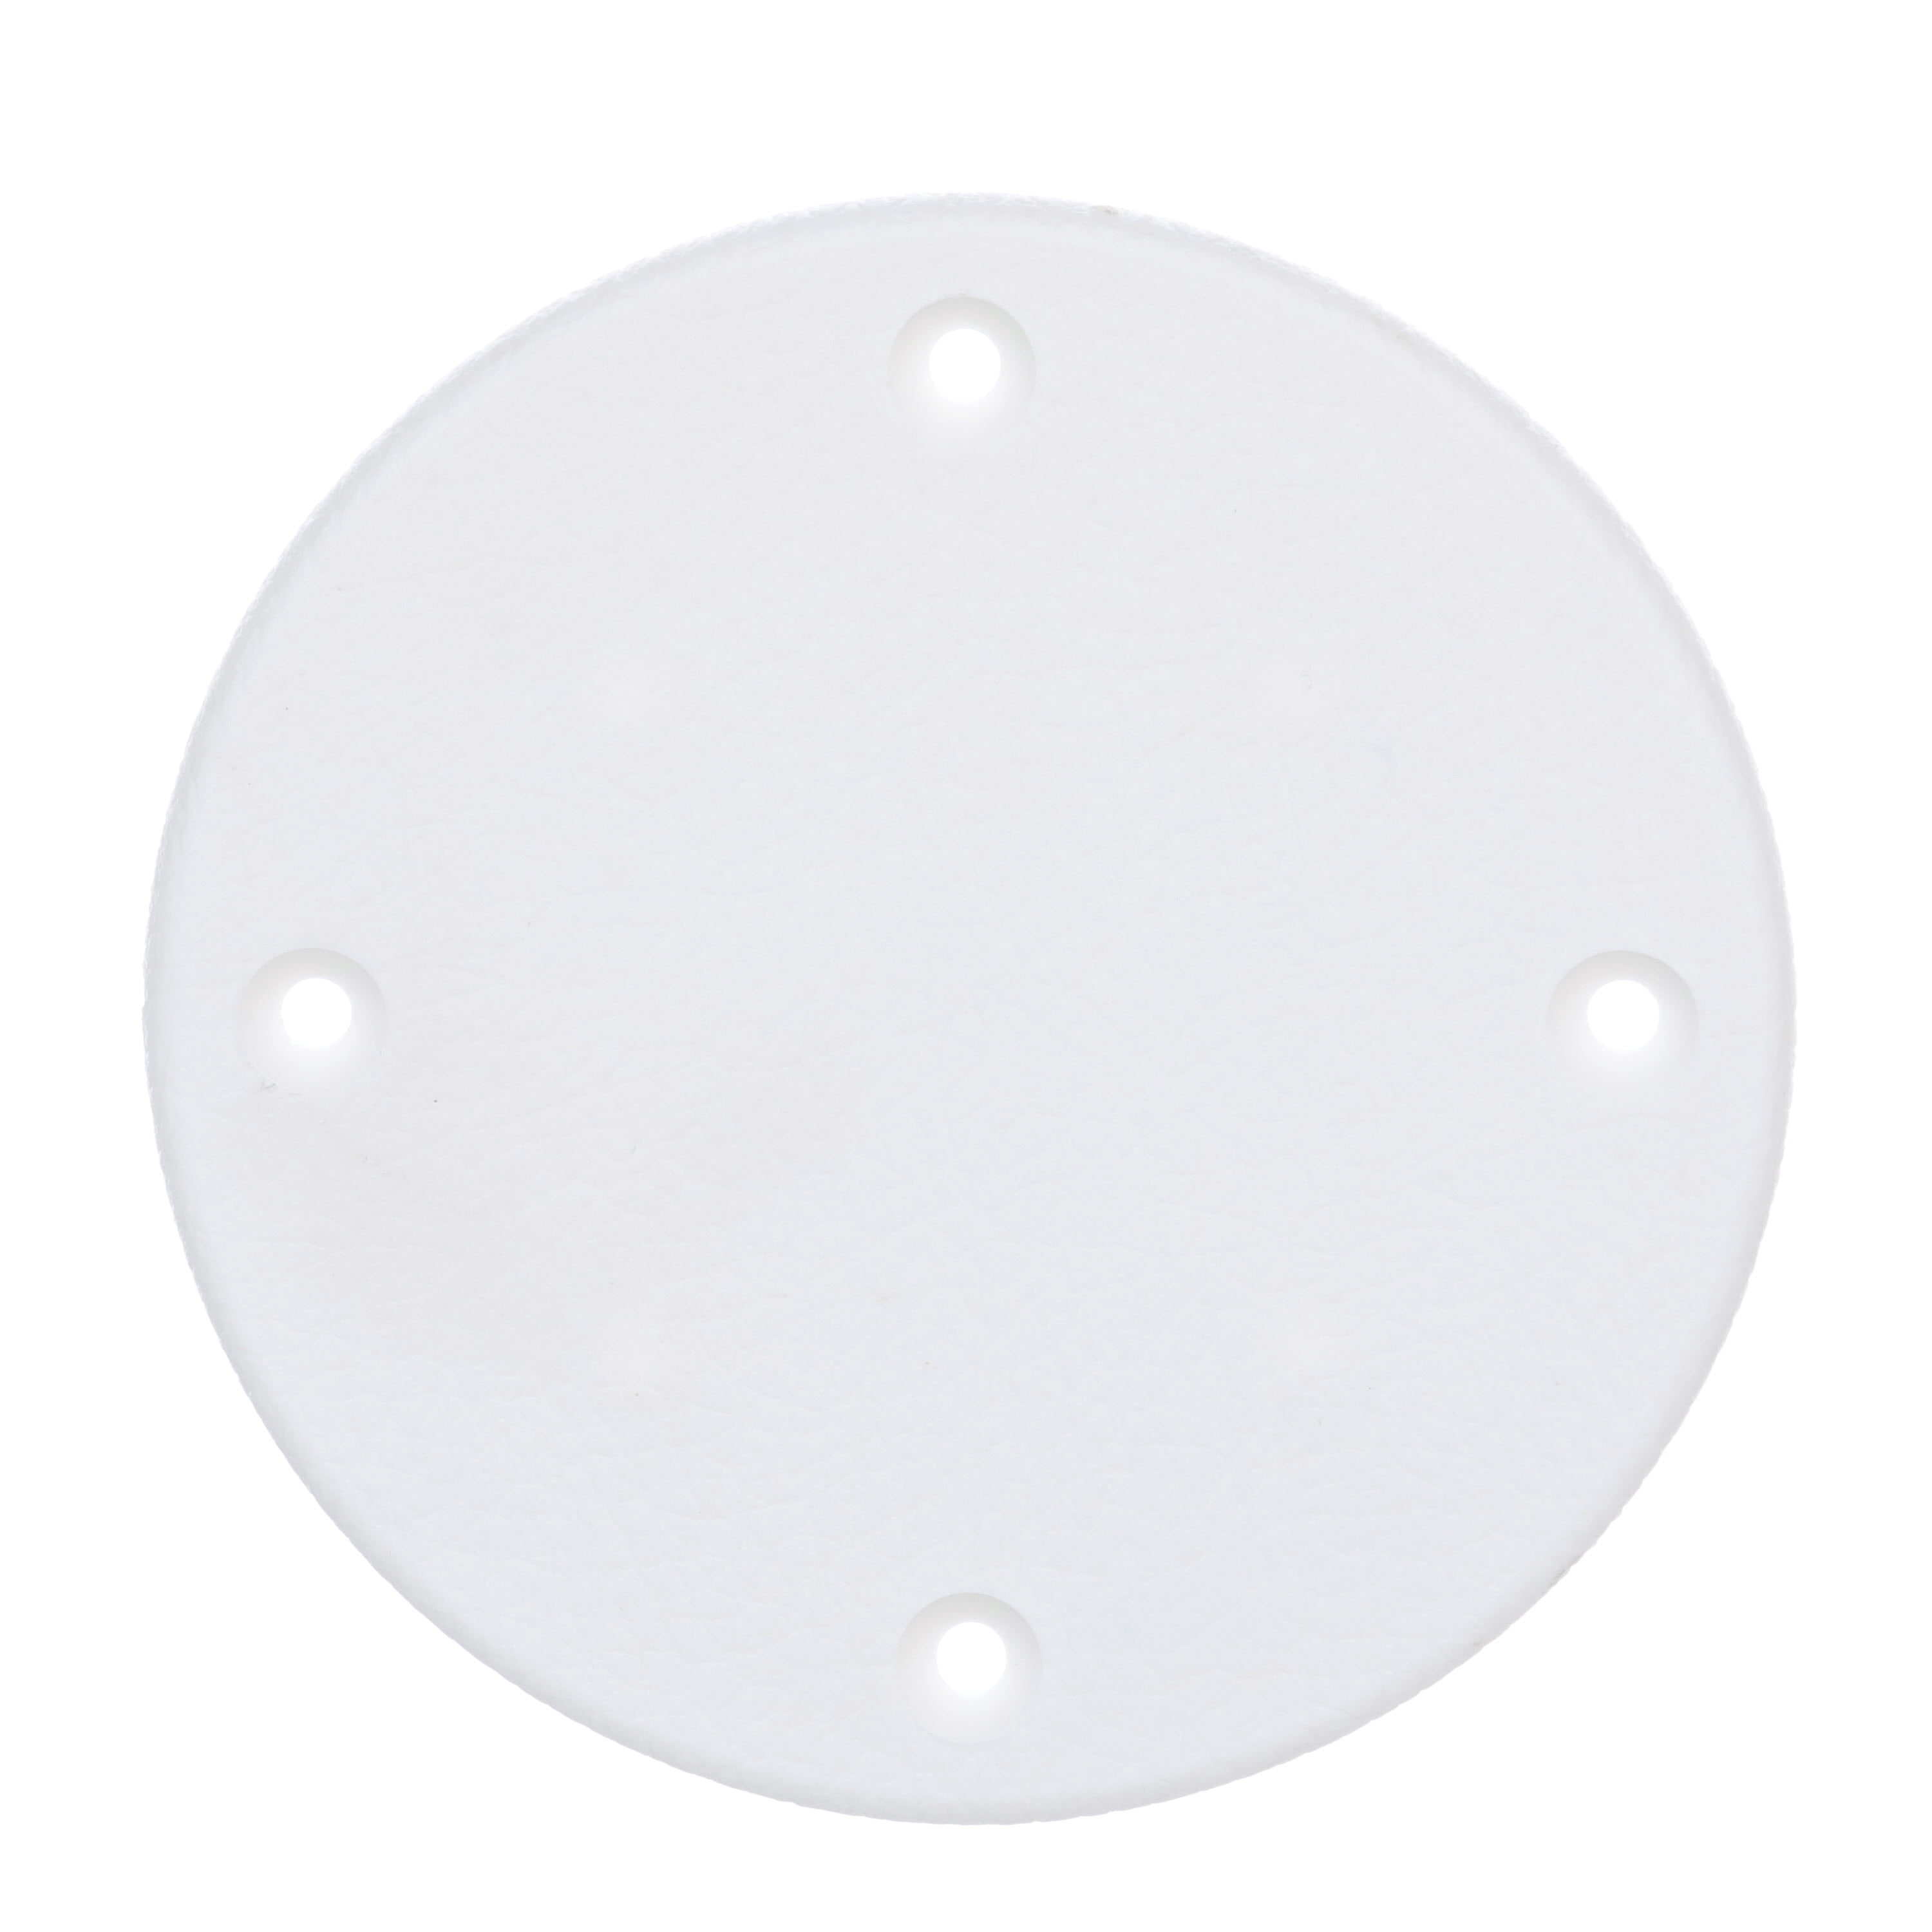 SEACHOICE 39601 Mounted Boat Plate Cover Arctic White Finish up to 4 Inches 